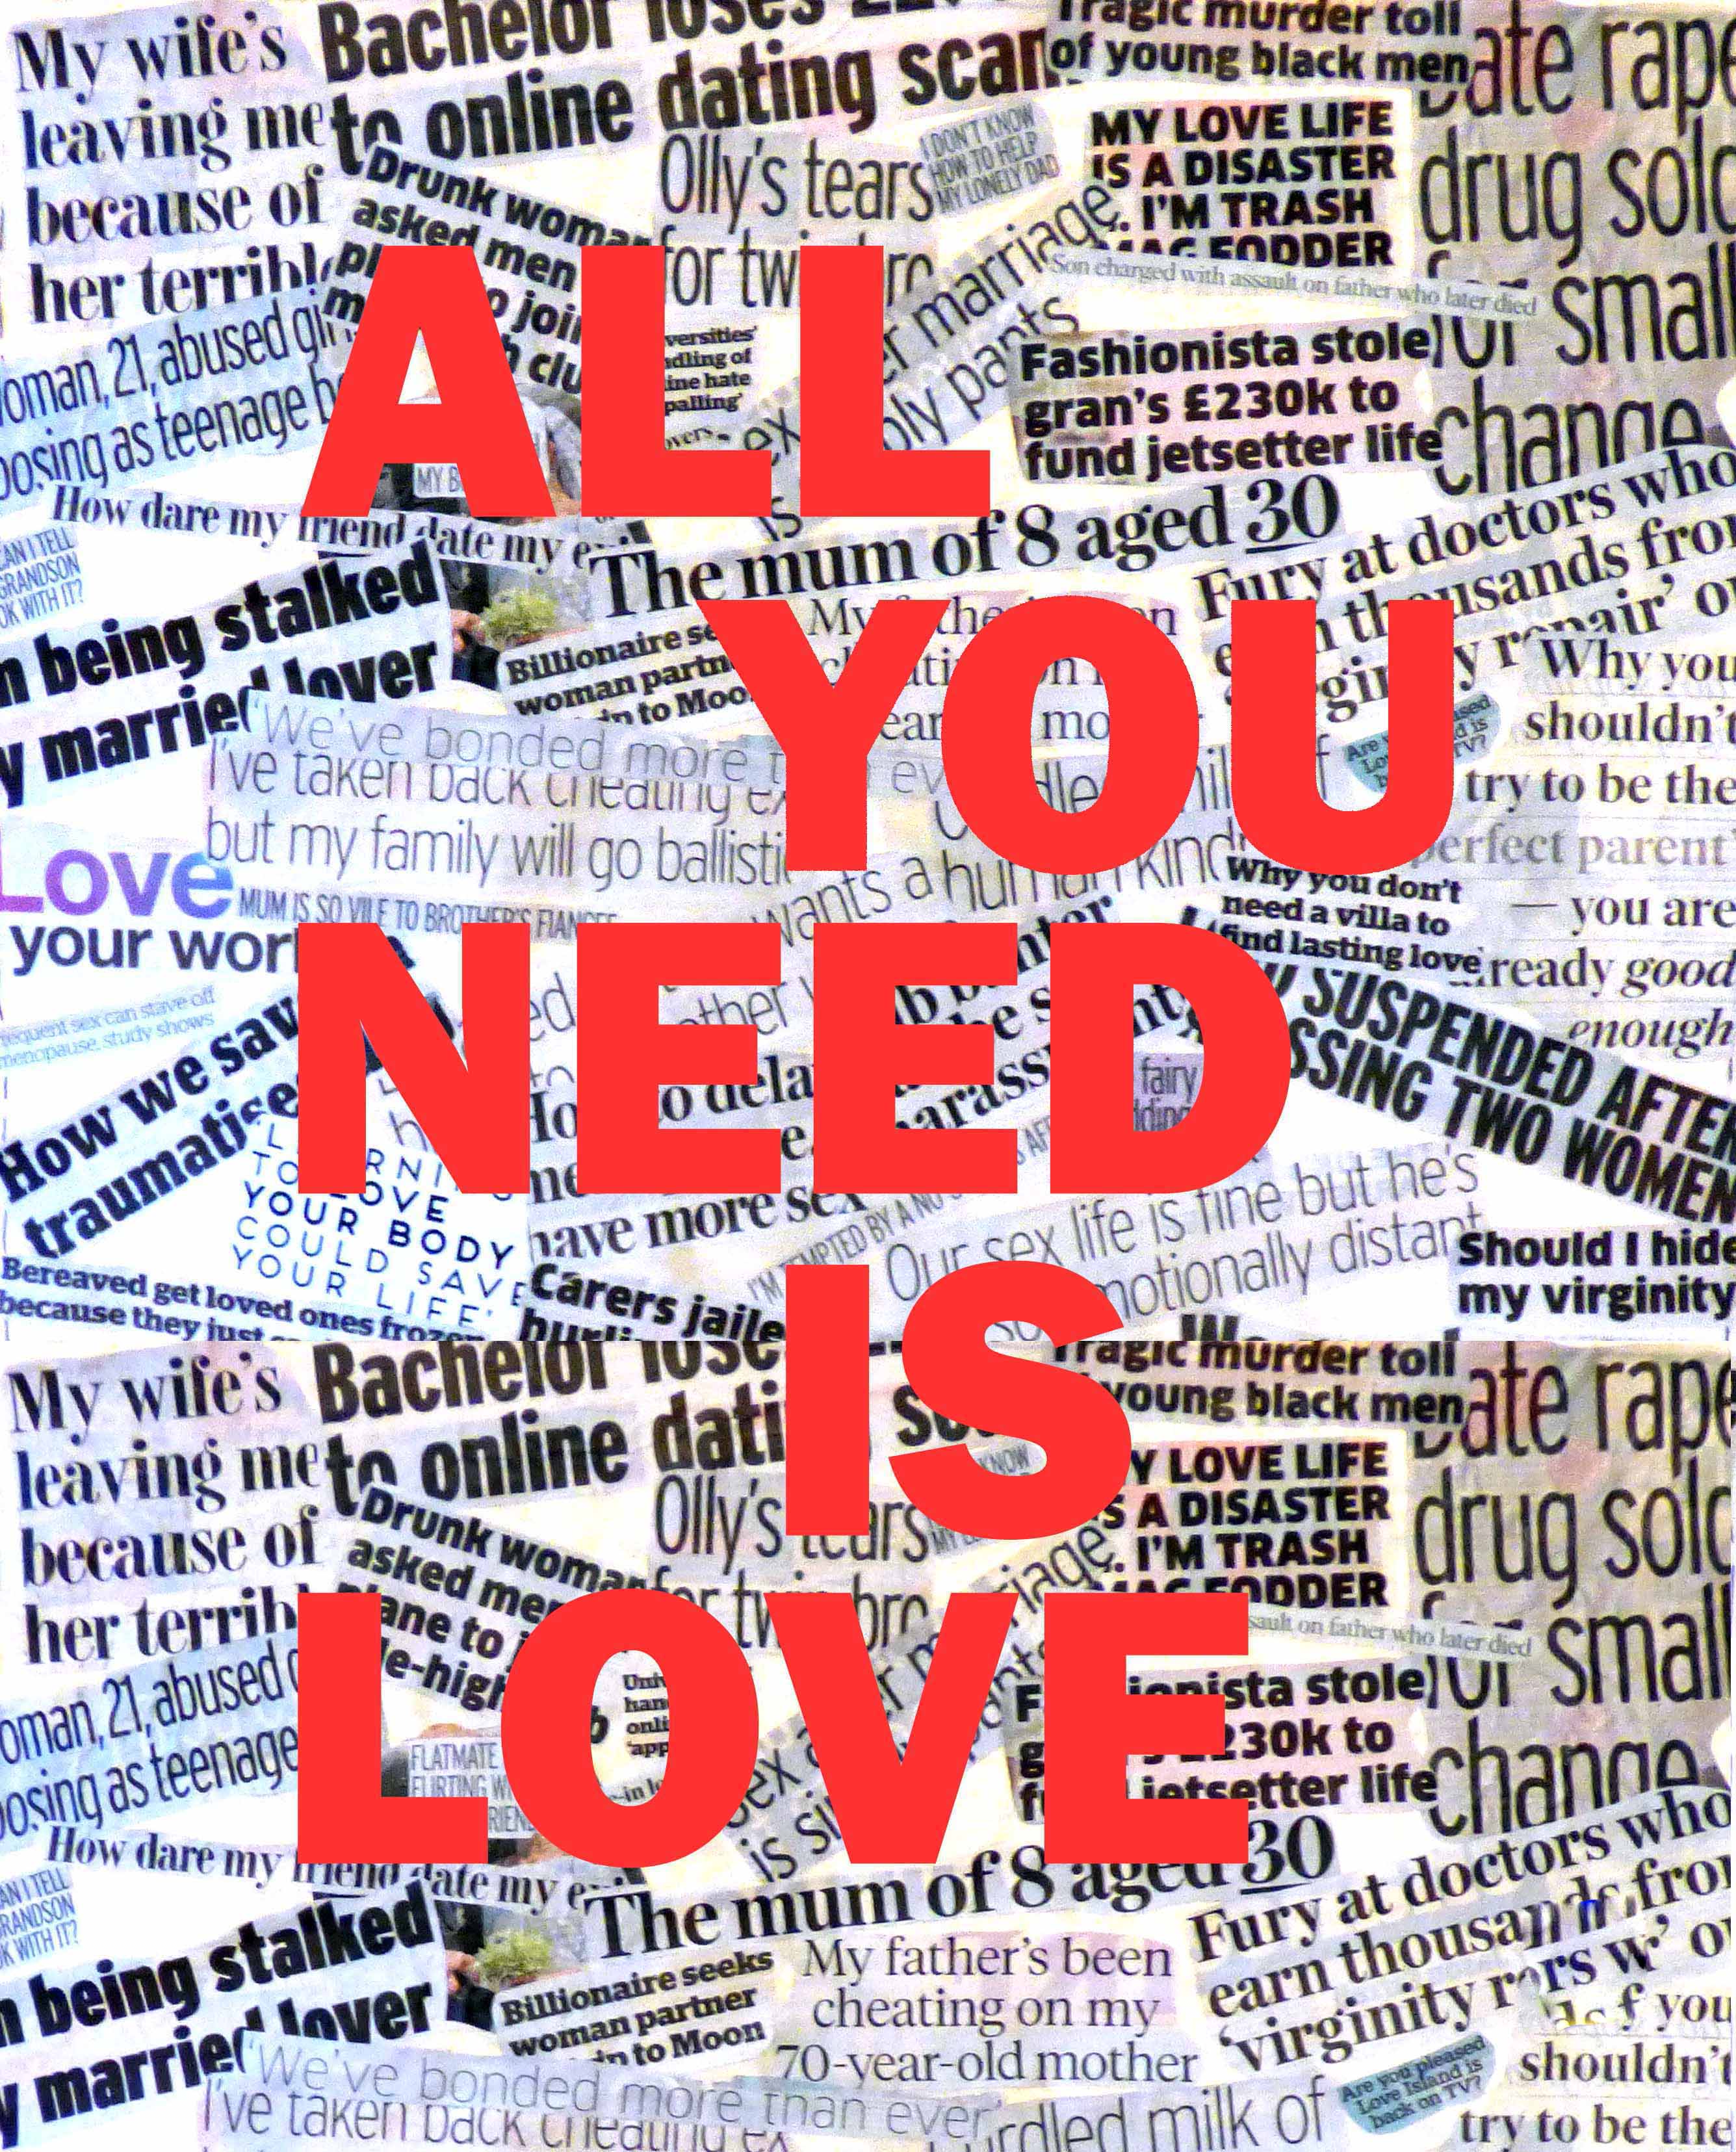 ALL YOU NEED IS LOVE by Hilary McCormack, Merseyside branch, reverse applique on newsprint and textile, Rose Bowl competition 2021